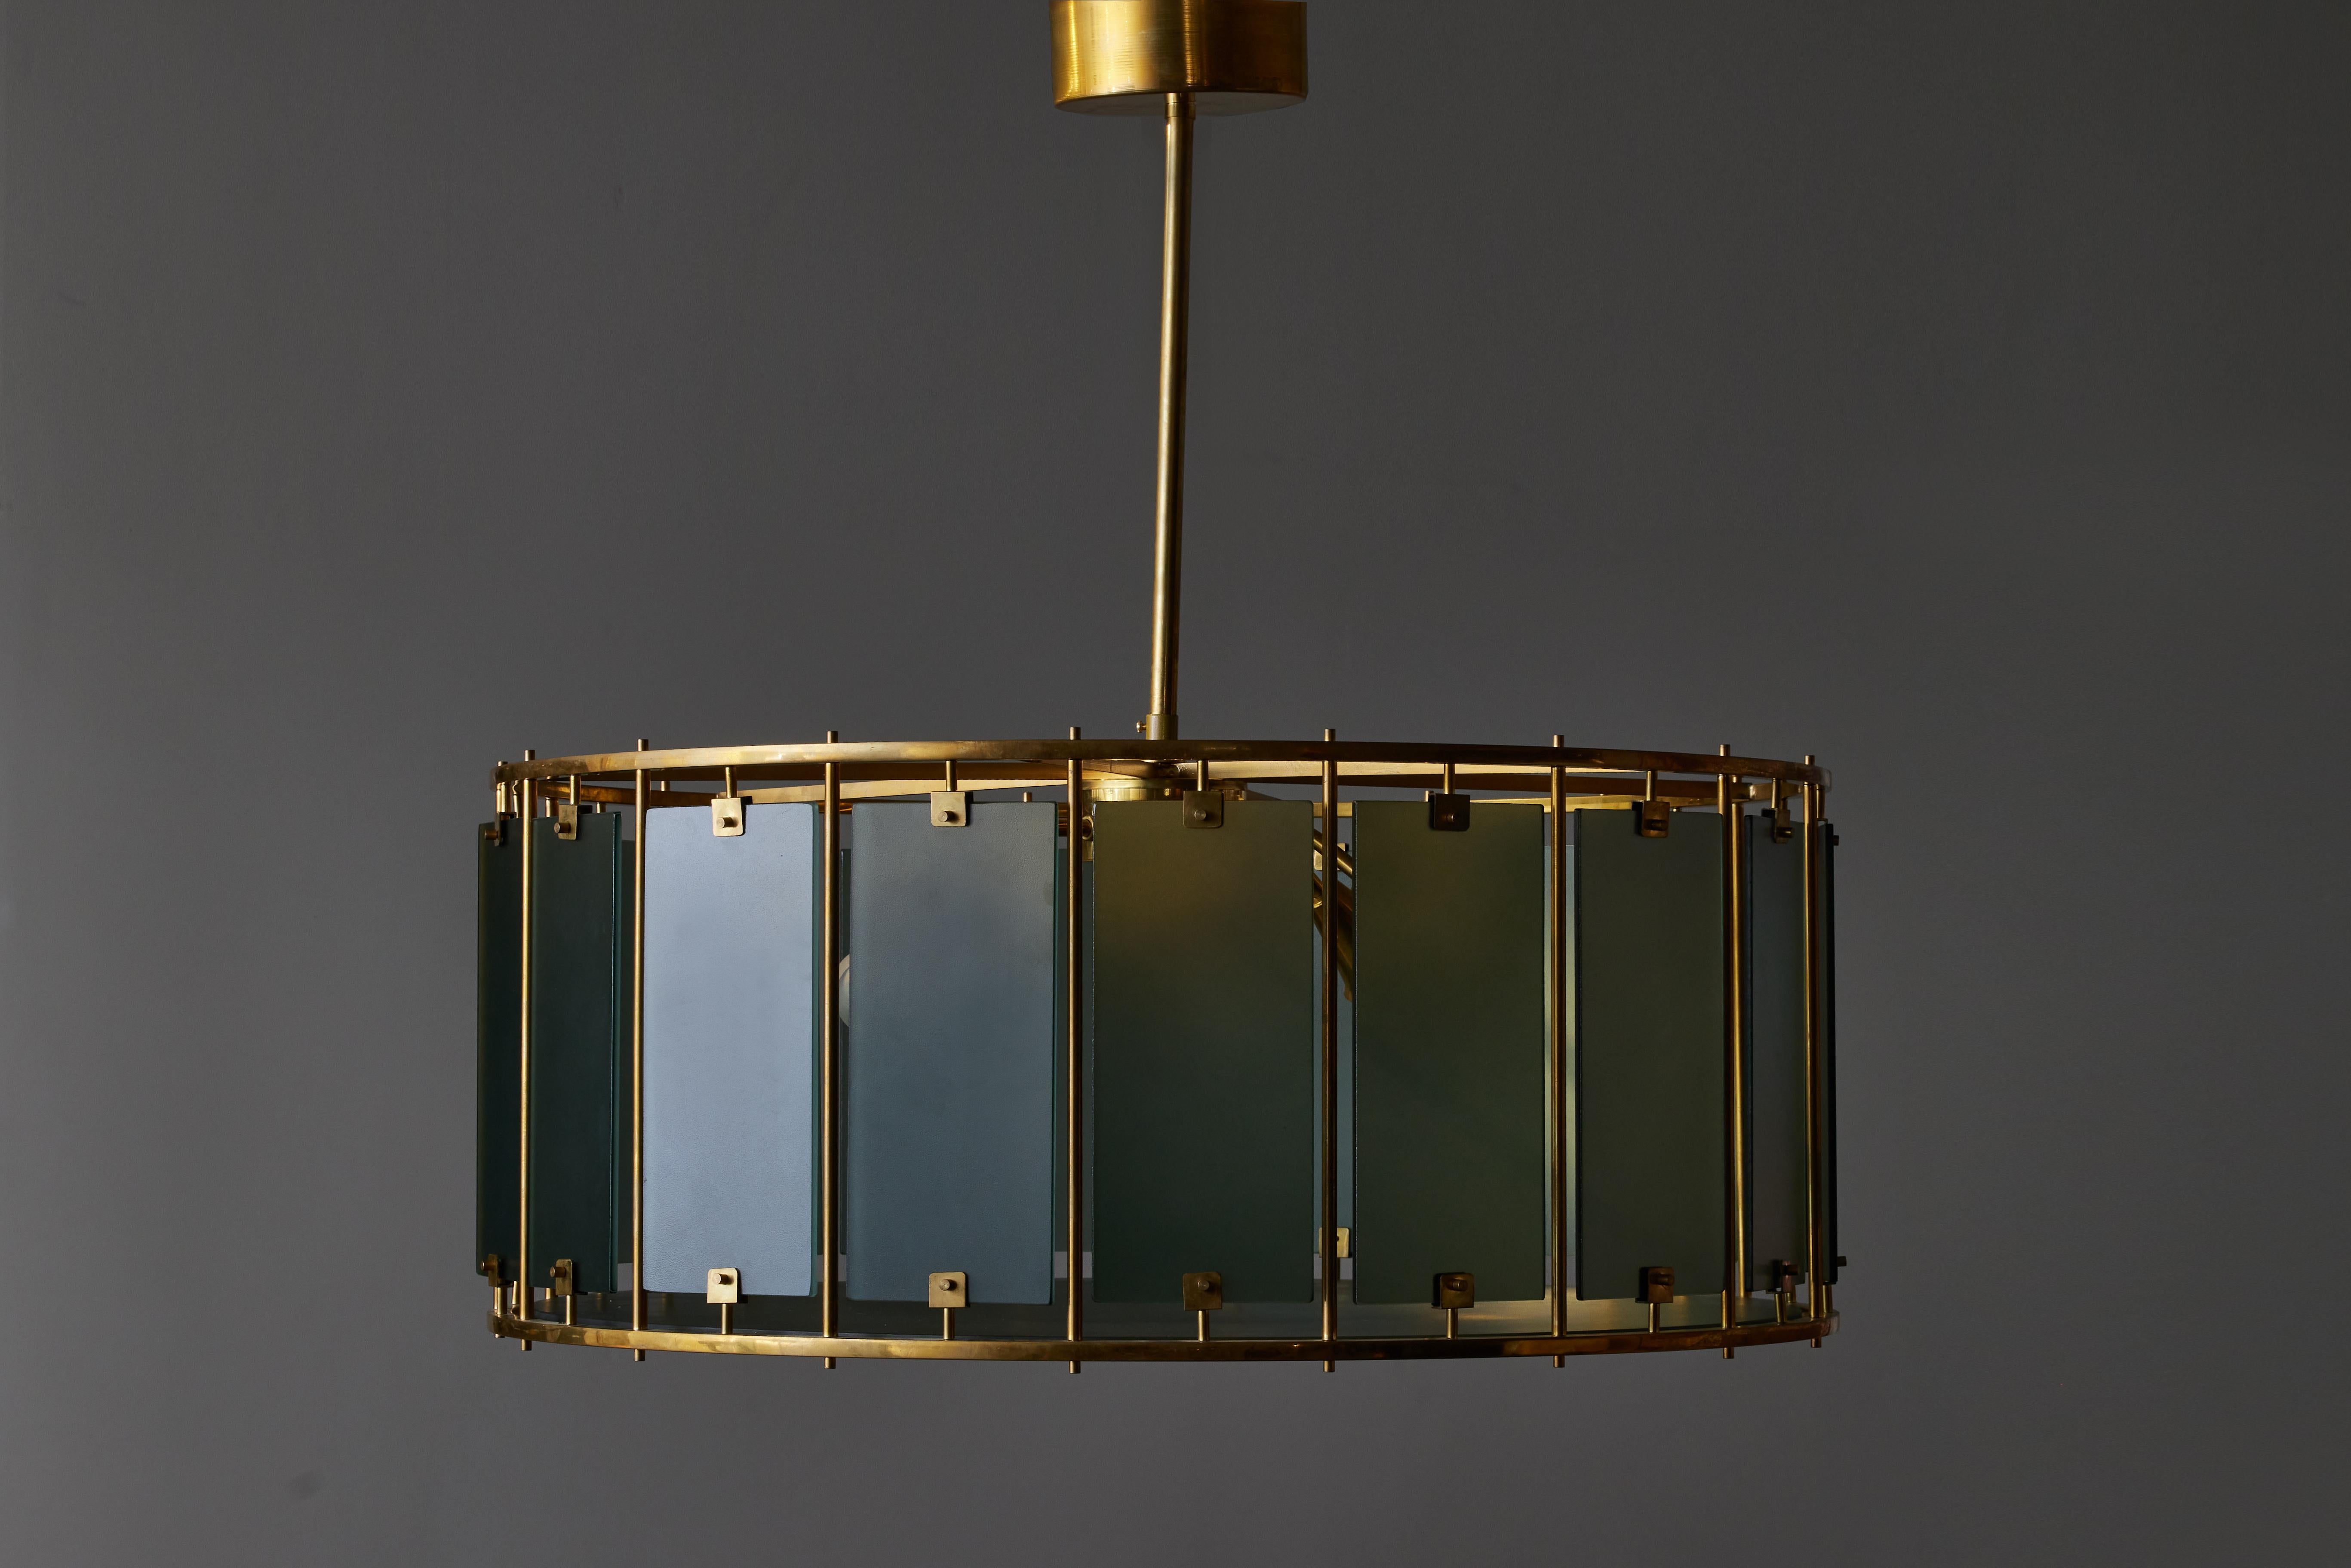 Round chandelier made of a brass structure, setting frosted glass panels which act as diffusers for the six sources of light inside the chandelier.